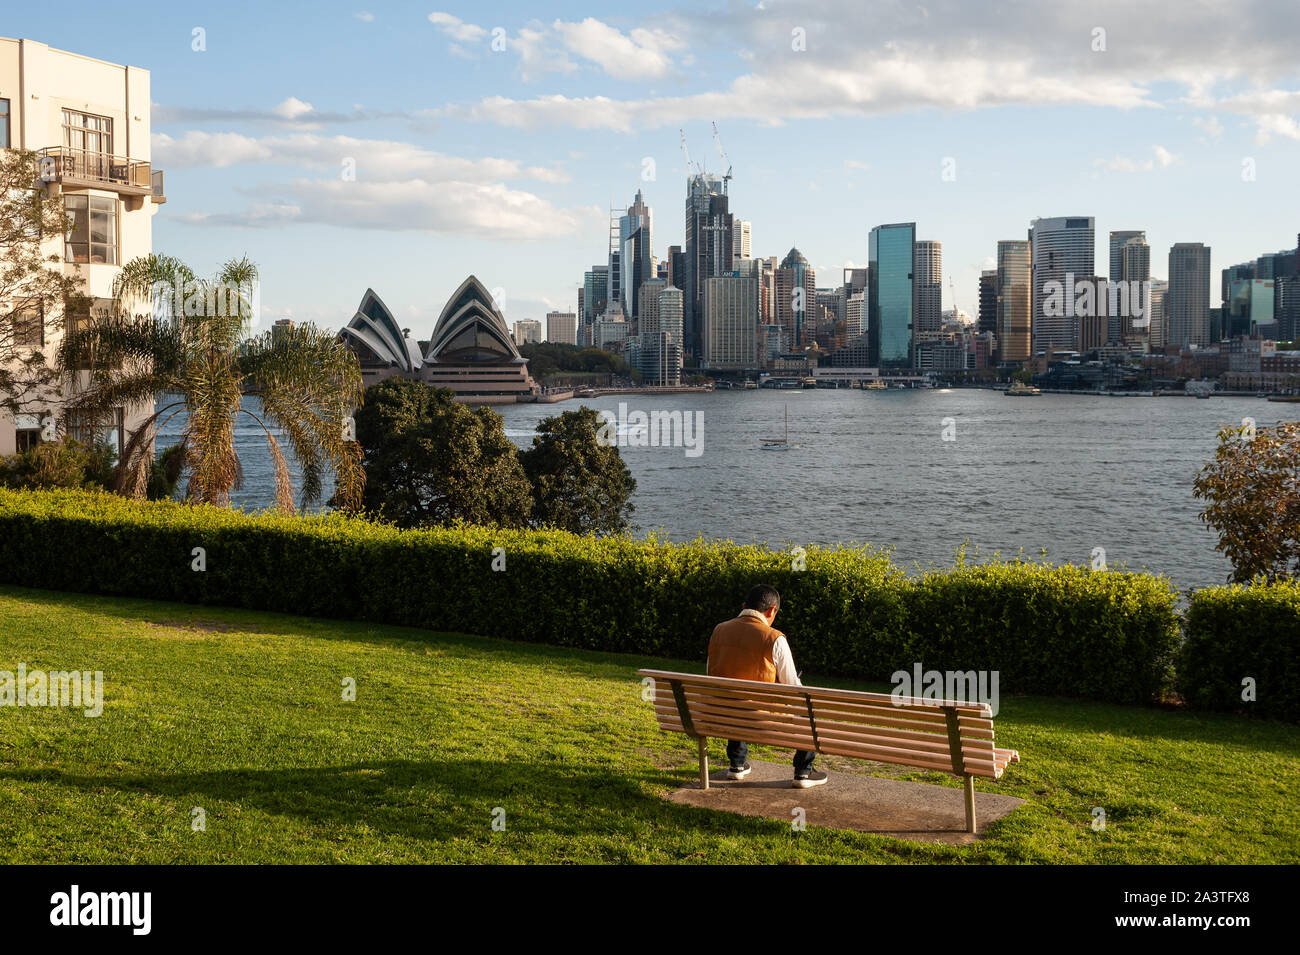 22.09.2019, Sydney, New South Wales, Australia - View from a park at the waterfront in Kirribilli of the city skyline with central business district. Stock Photo